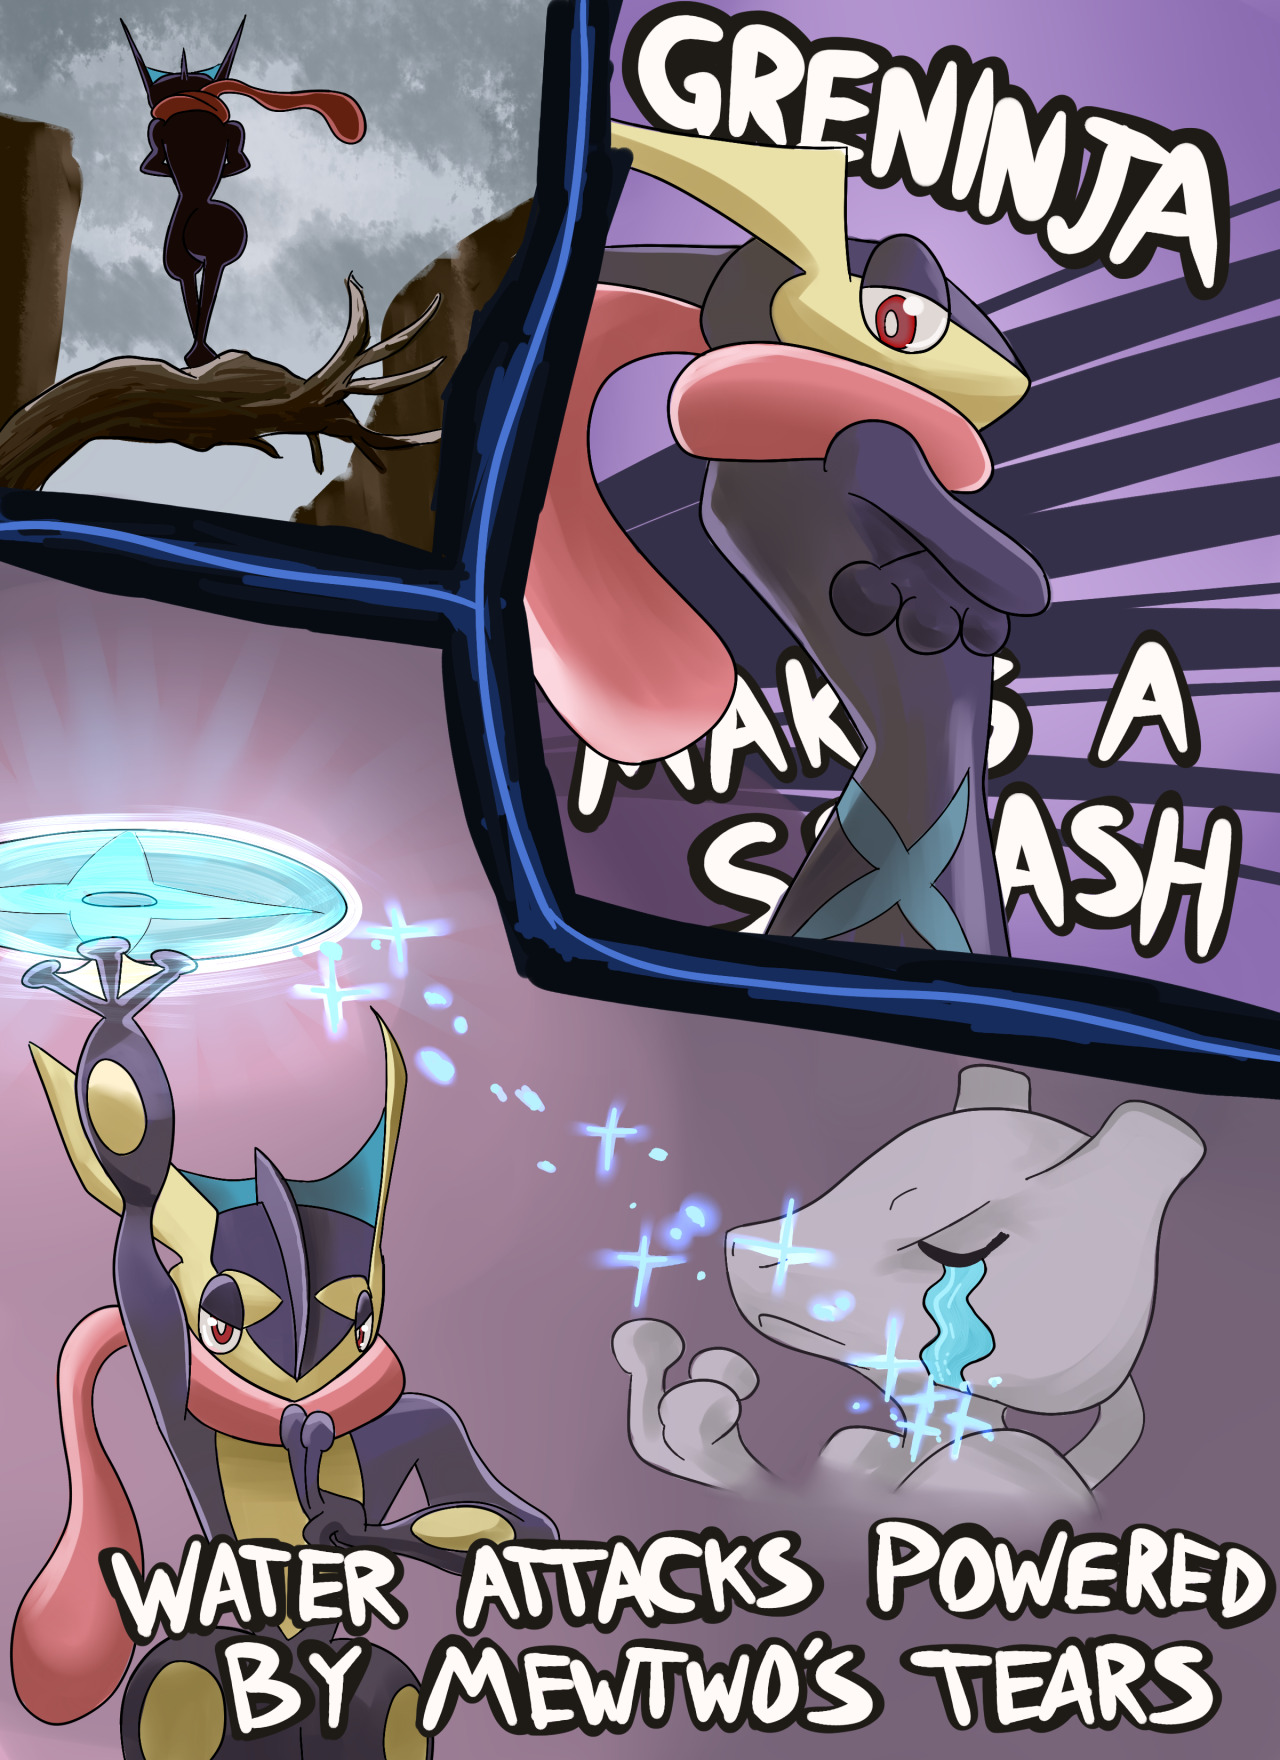 theatricalvulpine:  No matter what Greninja makes, the real splash is the one made